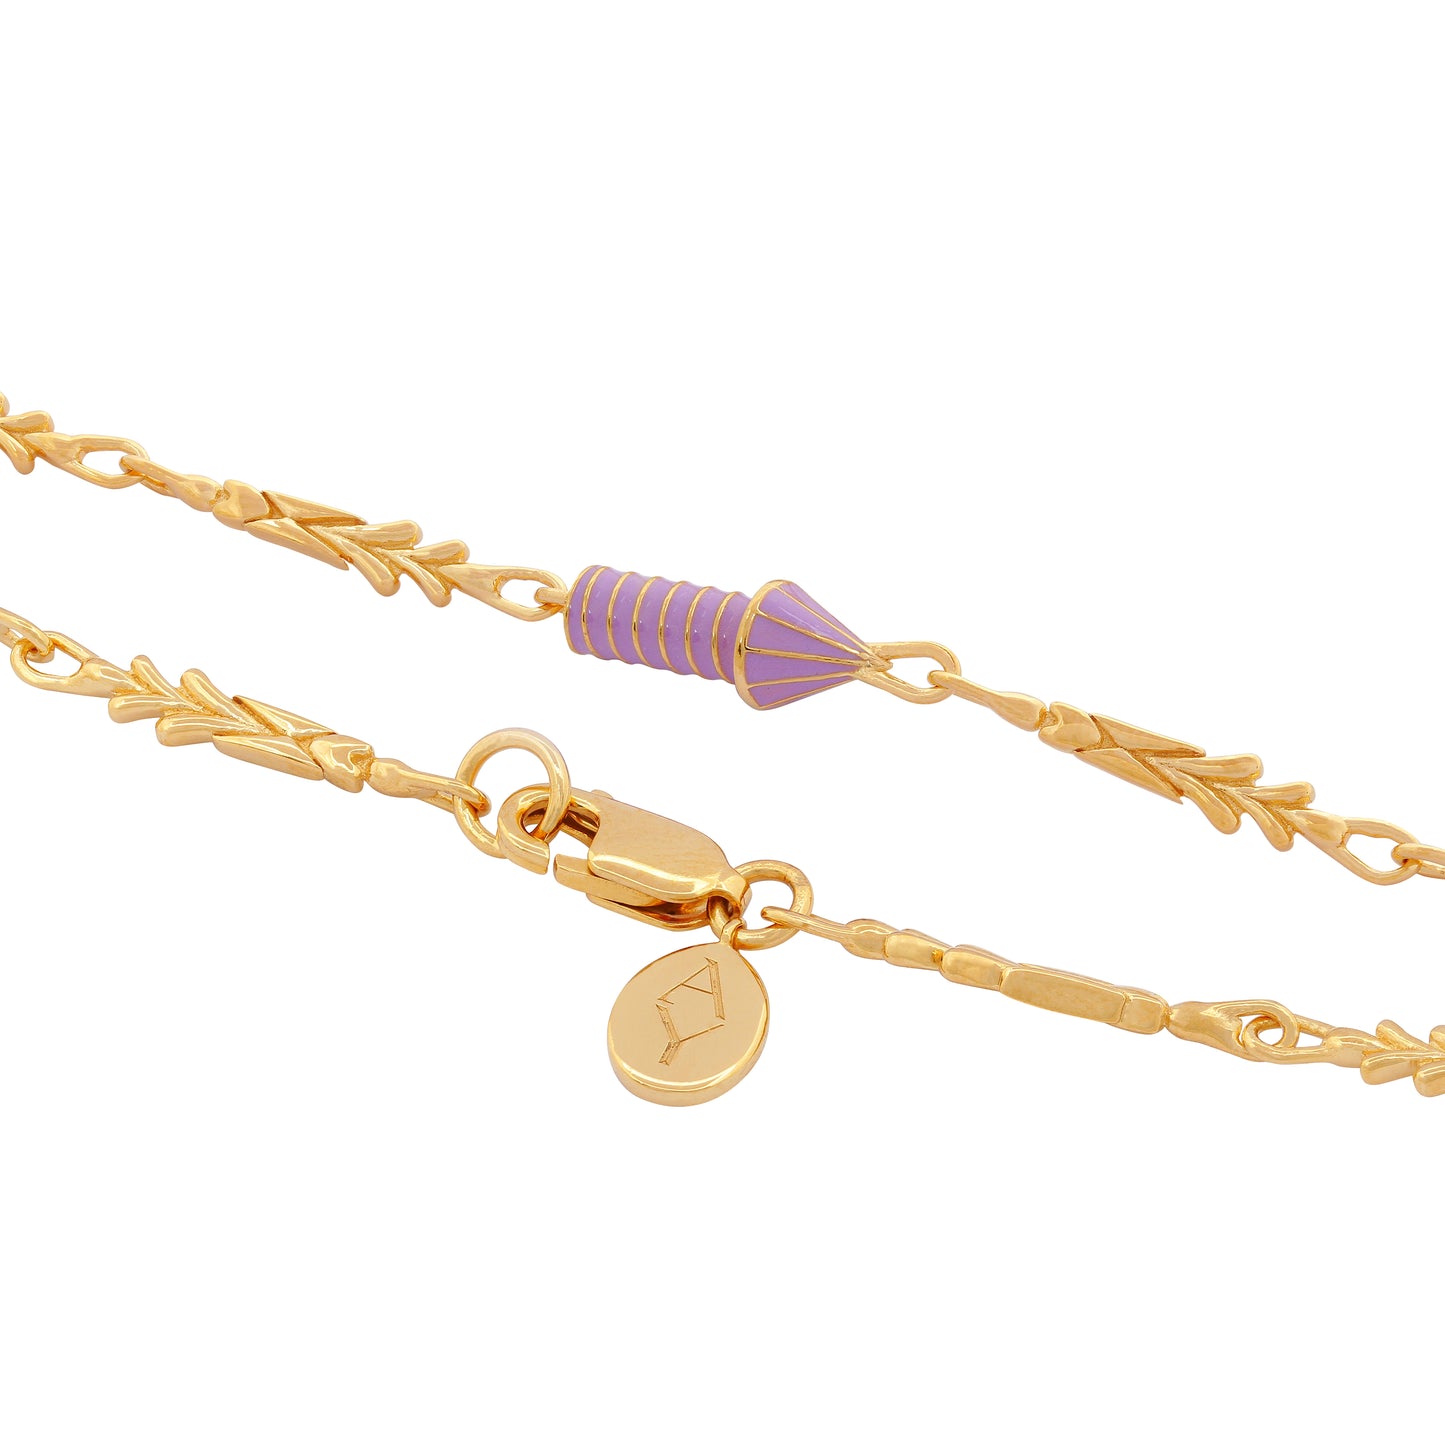 image of gold charm bracelet with purple enamel rocket close up view of rocket and lock with logo tag on white background